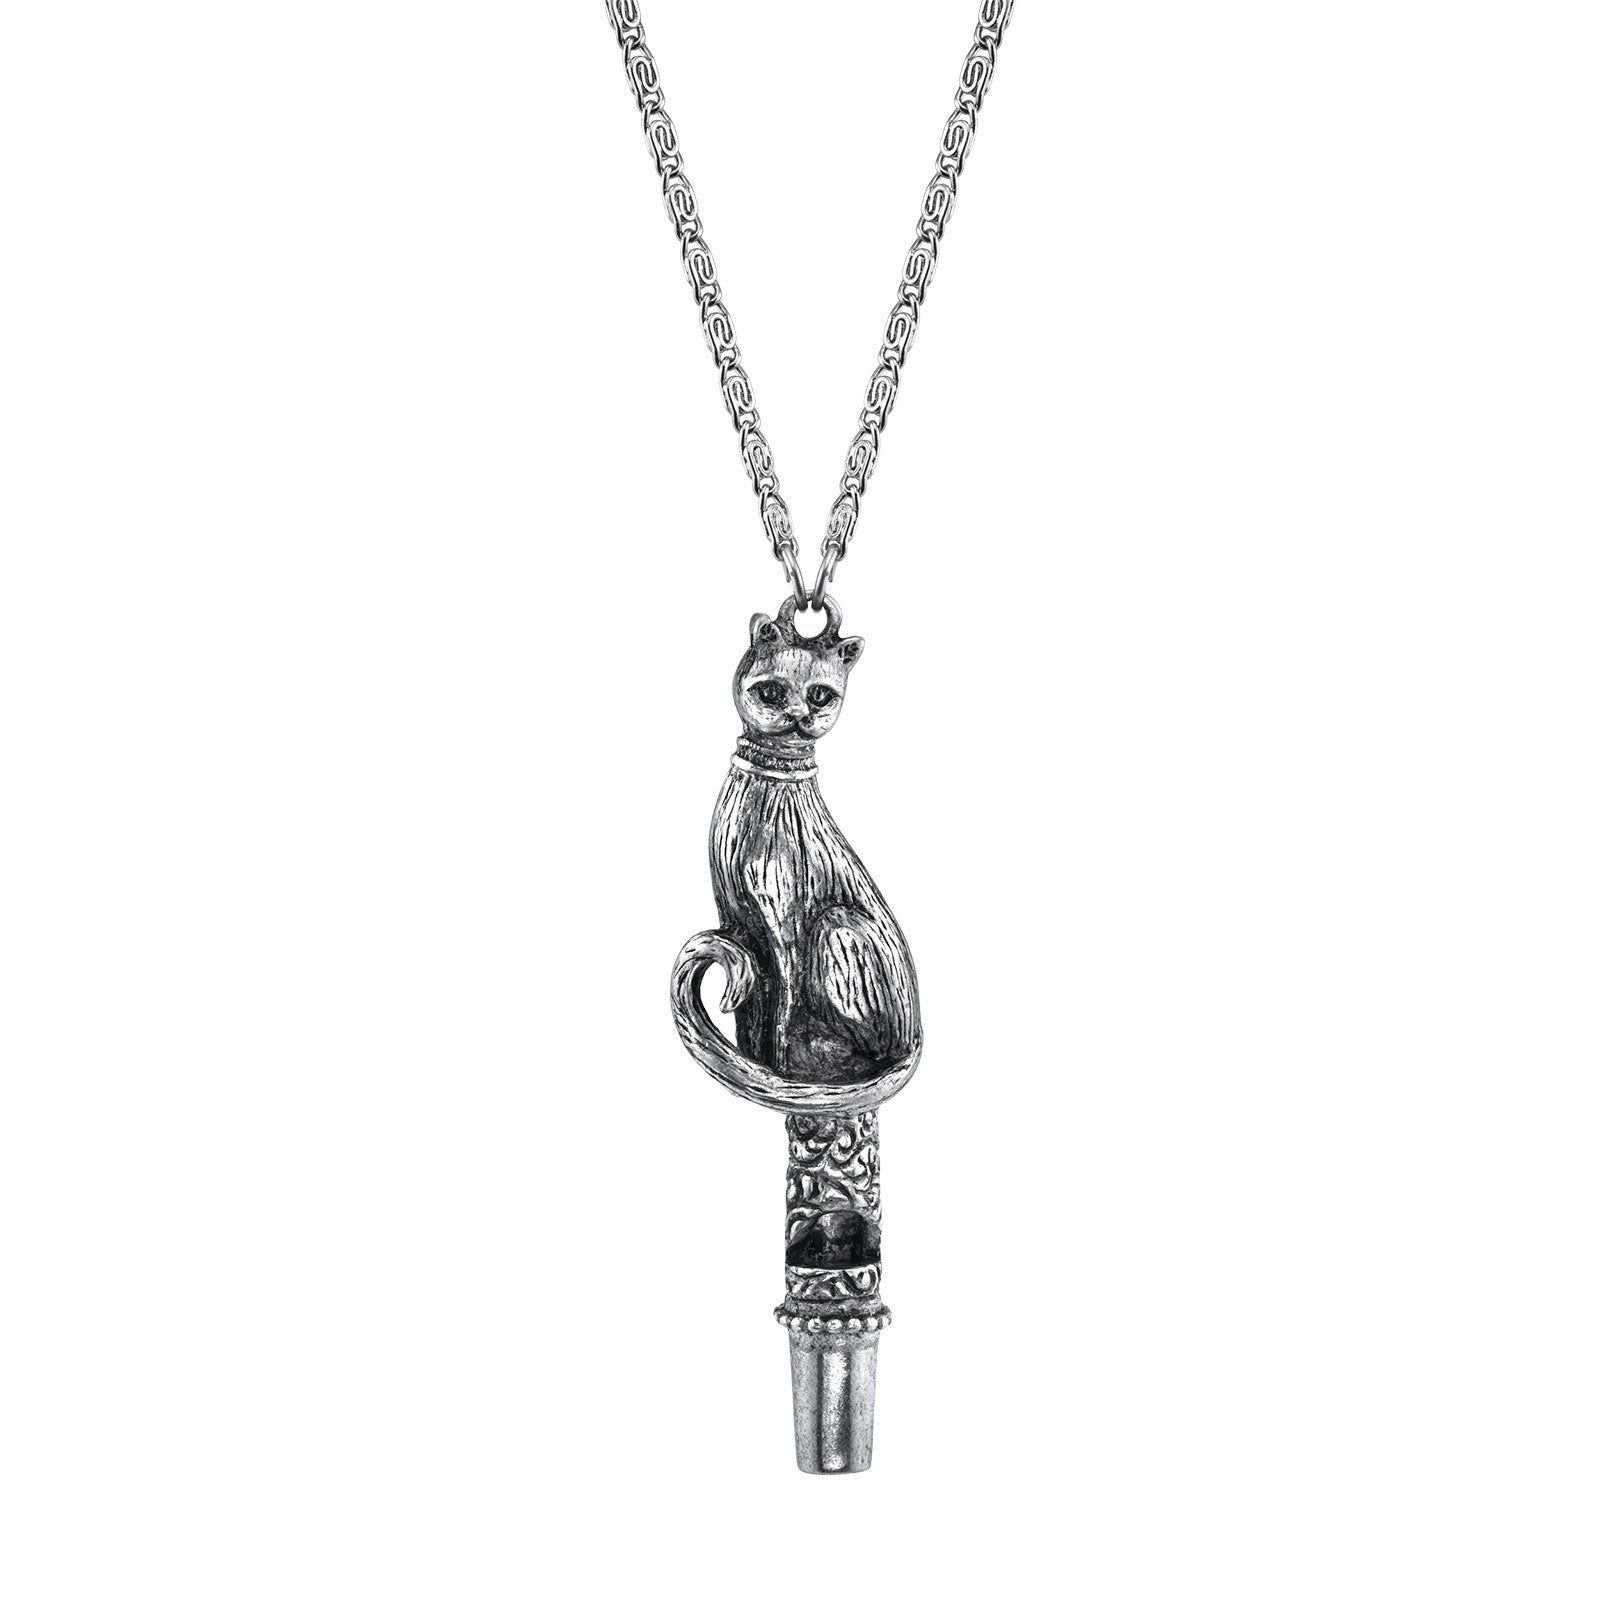 Antiqued Pewter Cat Whistle Pendant Necklace 30in